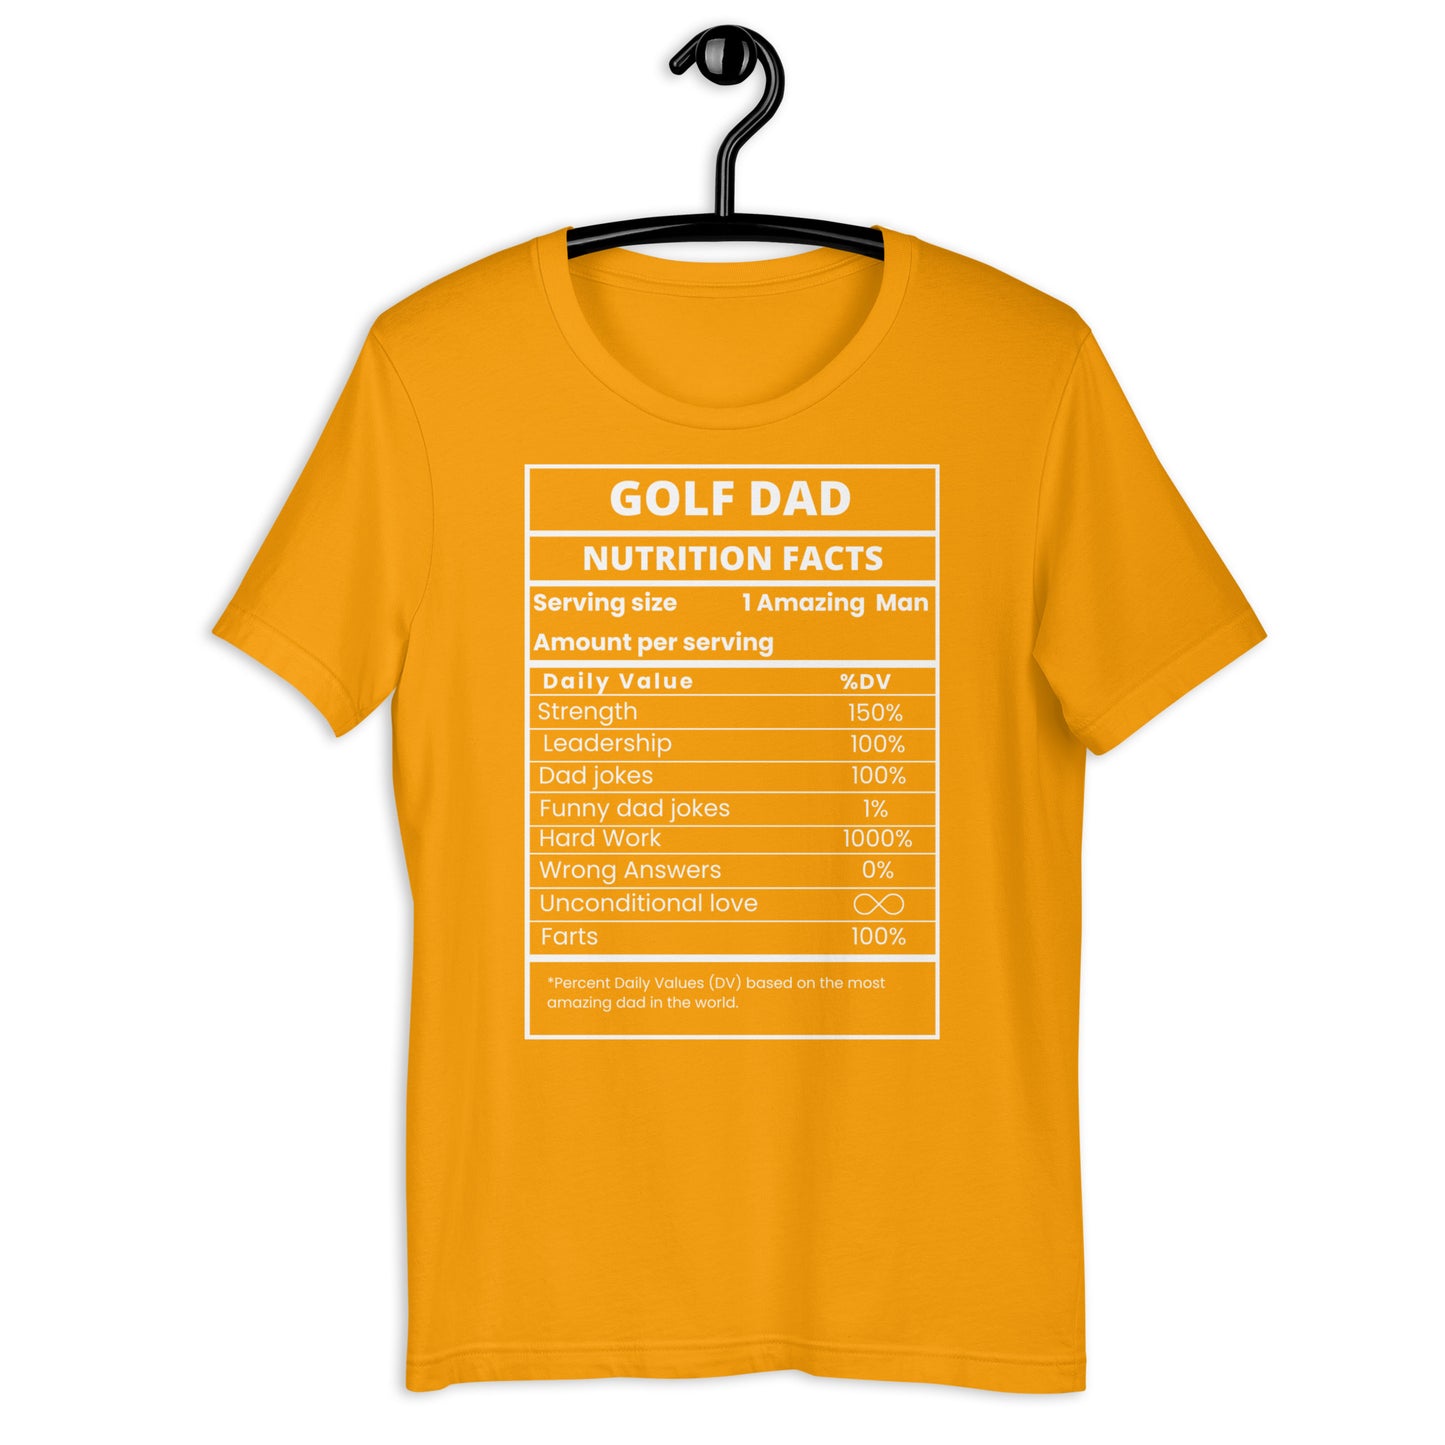 Golf Dad Nutrition Facts